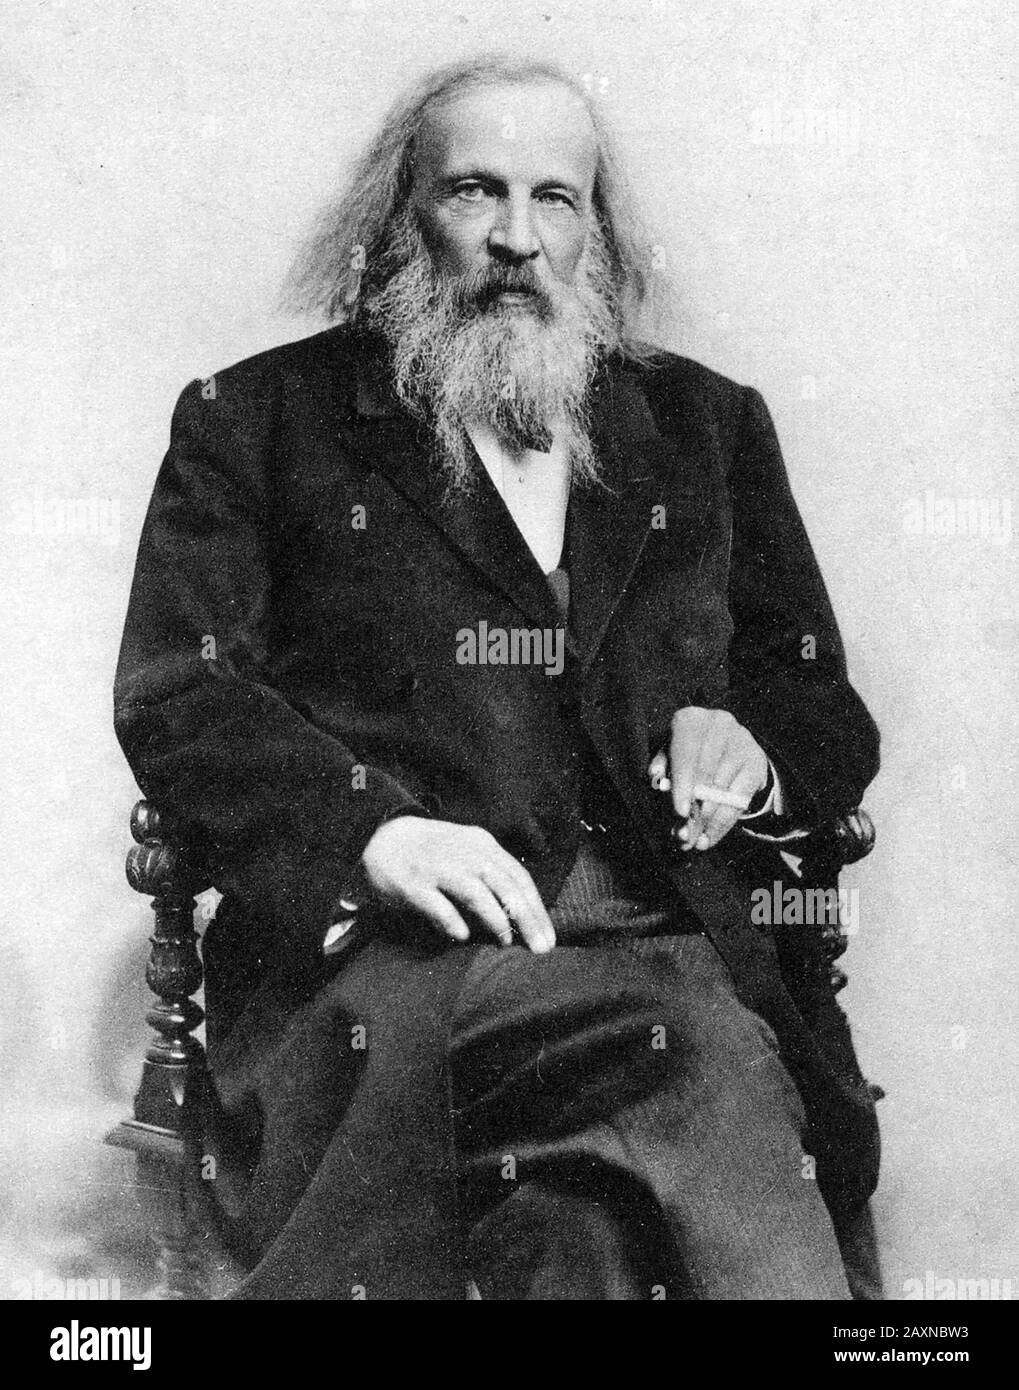 DMITRI MENDELEEV (1834-1907) Russian chemist and inventor who formulated the Periodic Code, about 1897 Stock Photo